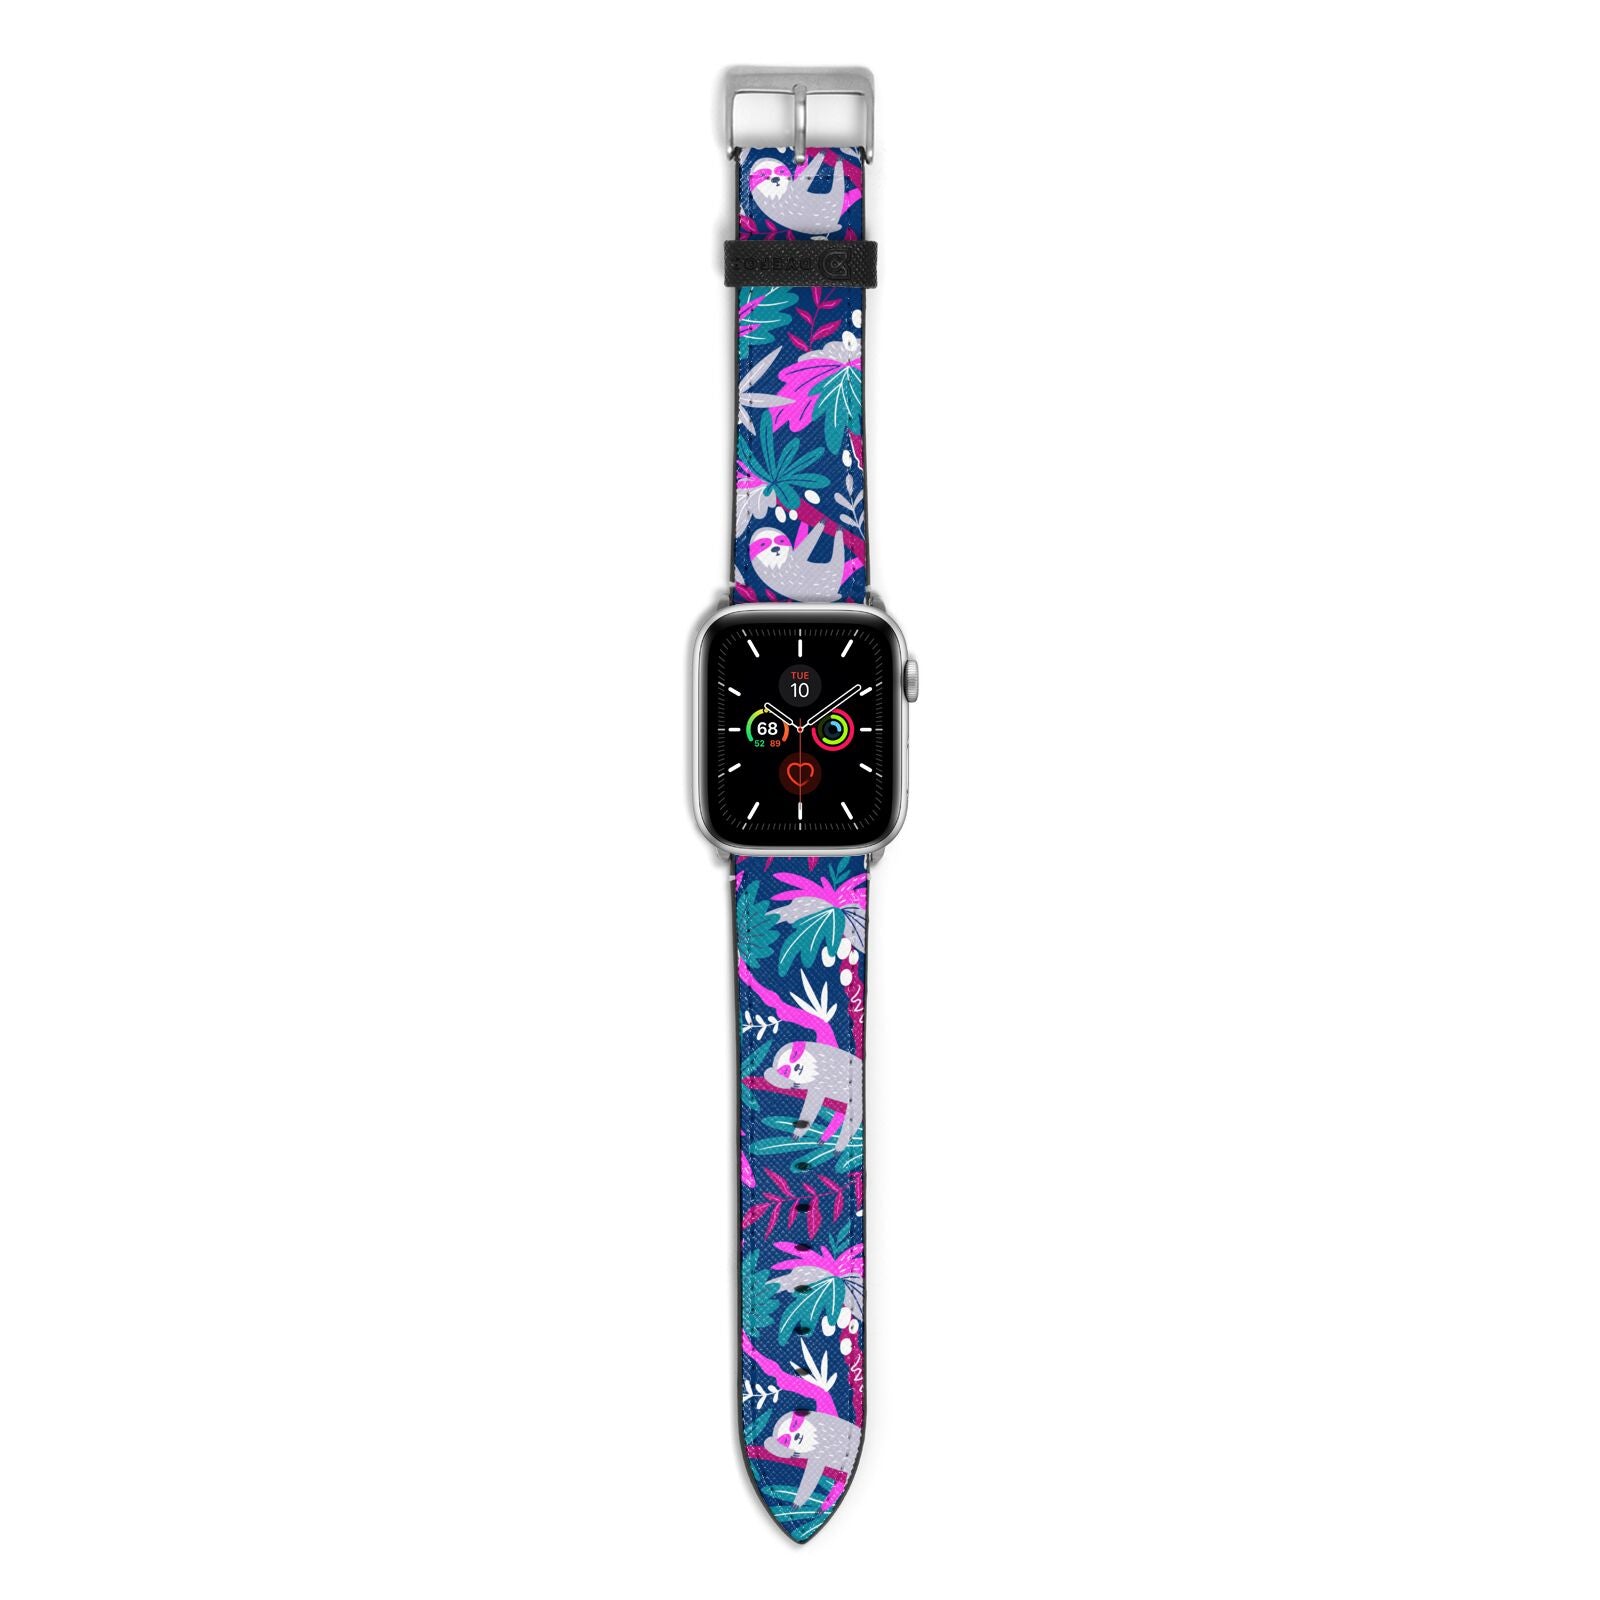 Sloth Apple Watch Strap with Silver Hardware